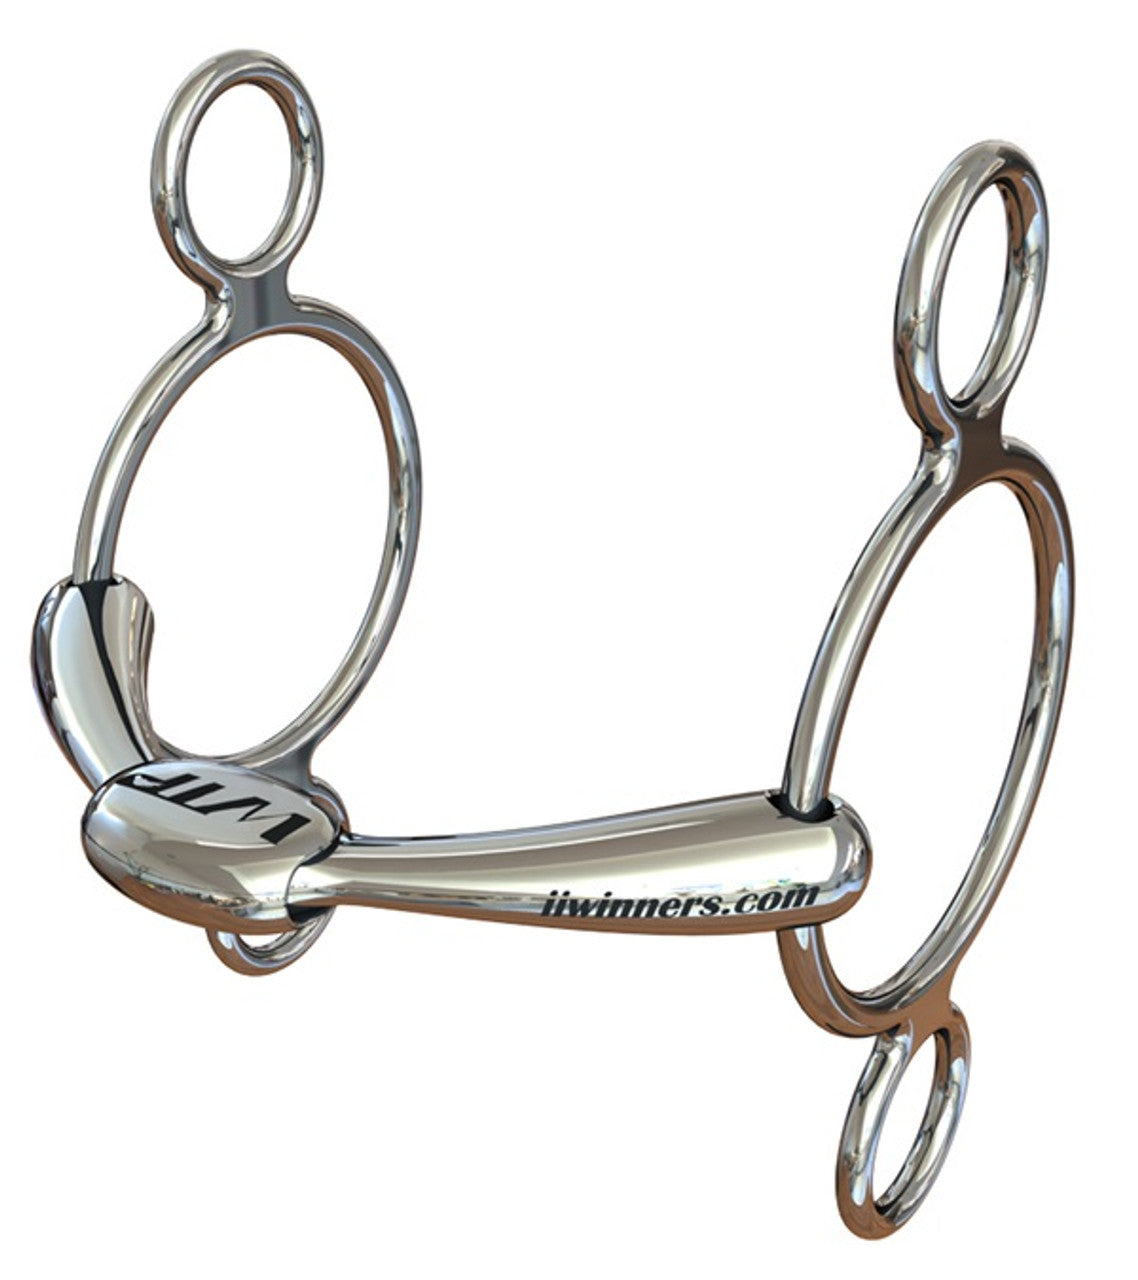 WTP (Winning Tongue Plate) 3 Ring Elevator Leverage Bit with Normal Plate-TexanSaddles.com